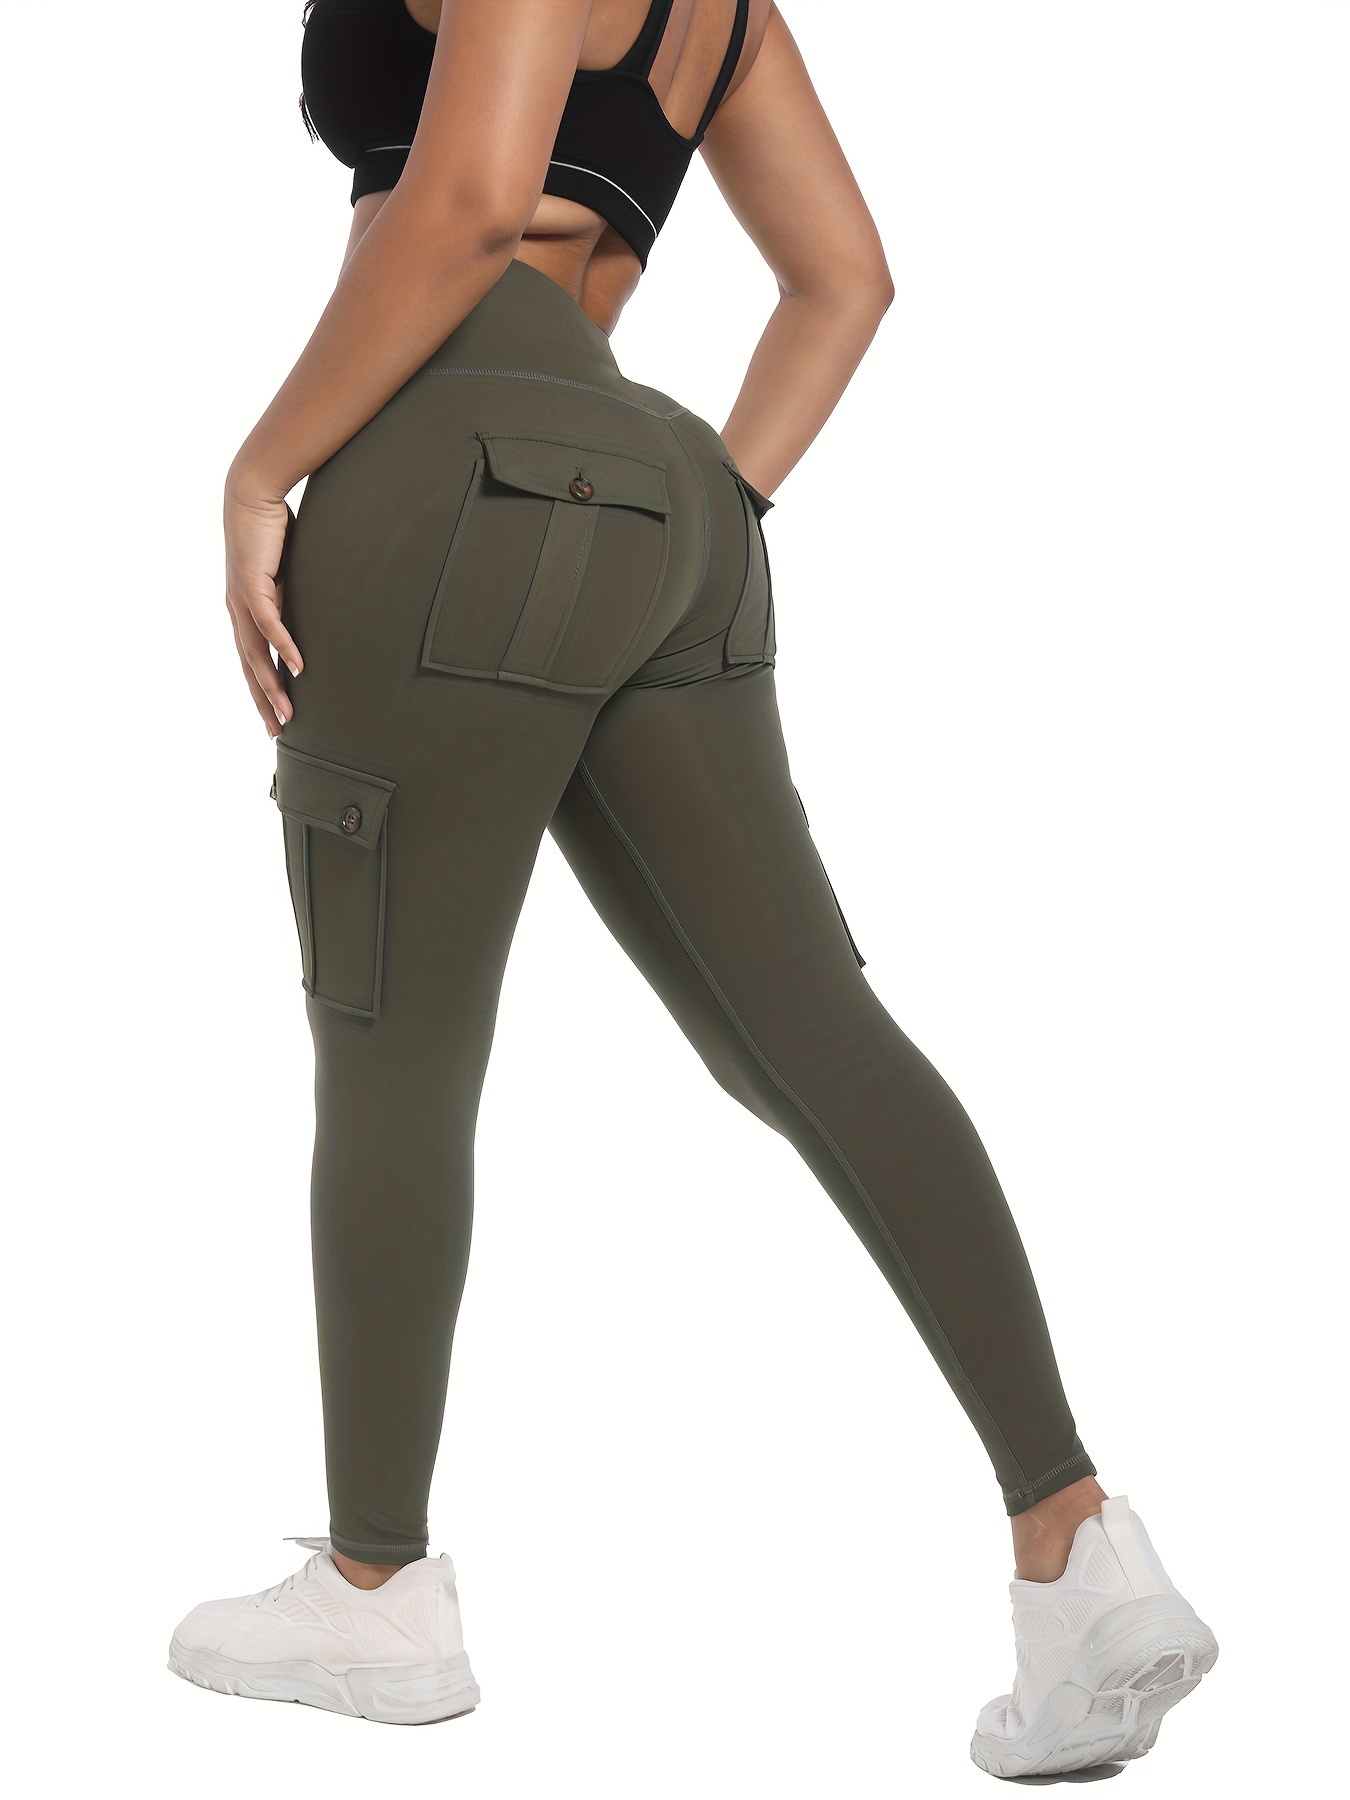 Women High Waisted Yoga Pants With Pockets Workout Butt Lifting